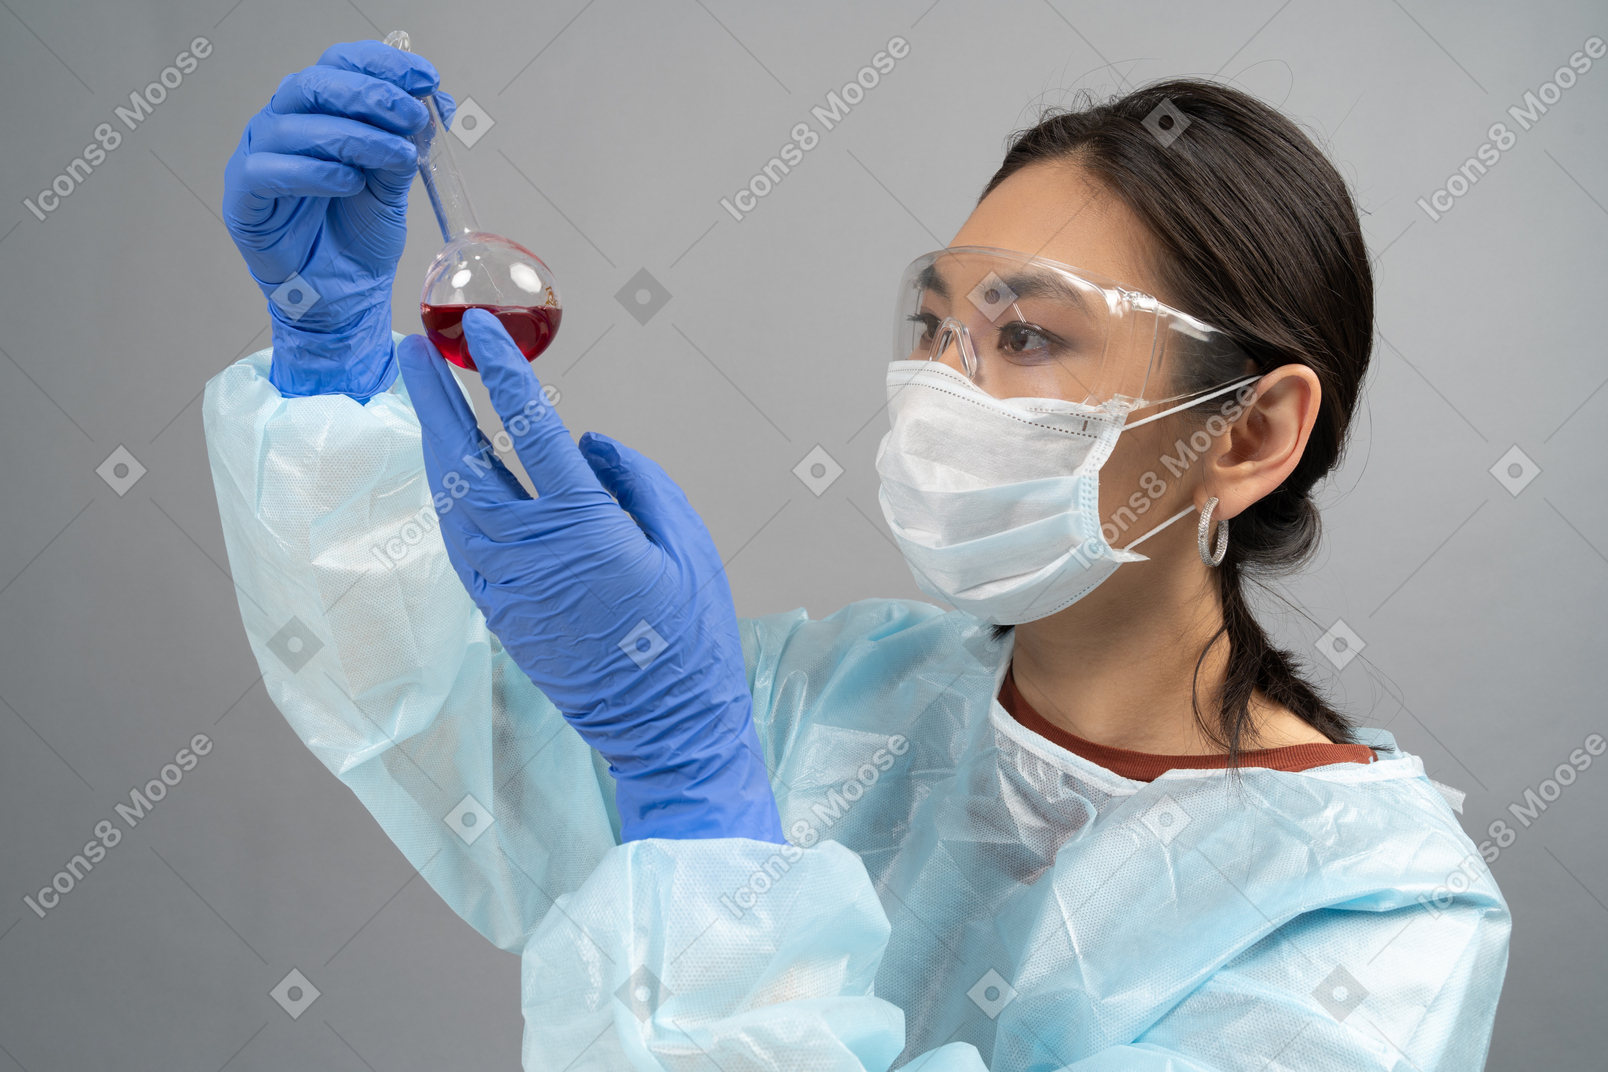 Medical specialist looking at tube